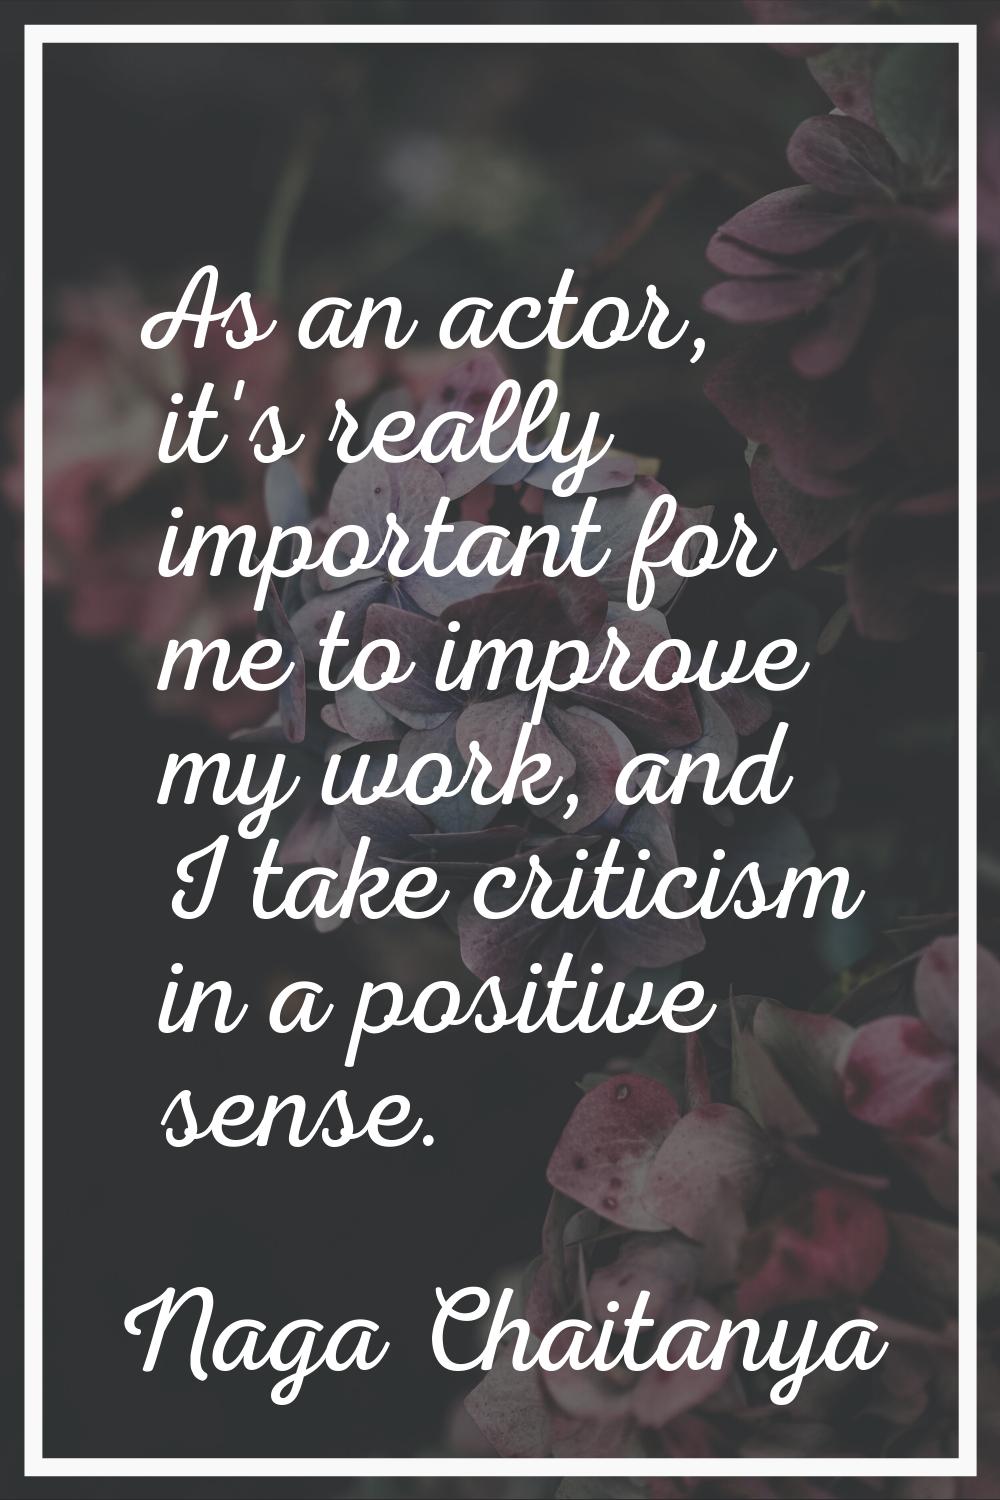 As an actor, it's really important for me to improve my work, and I take criticism in a positive se